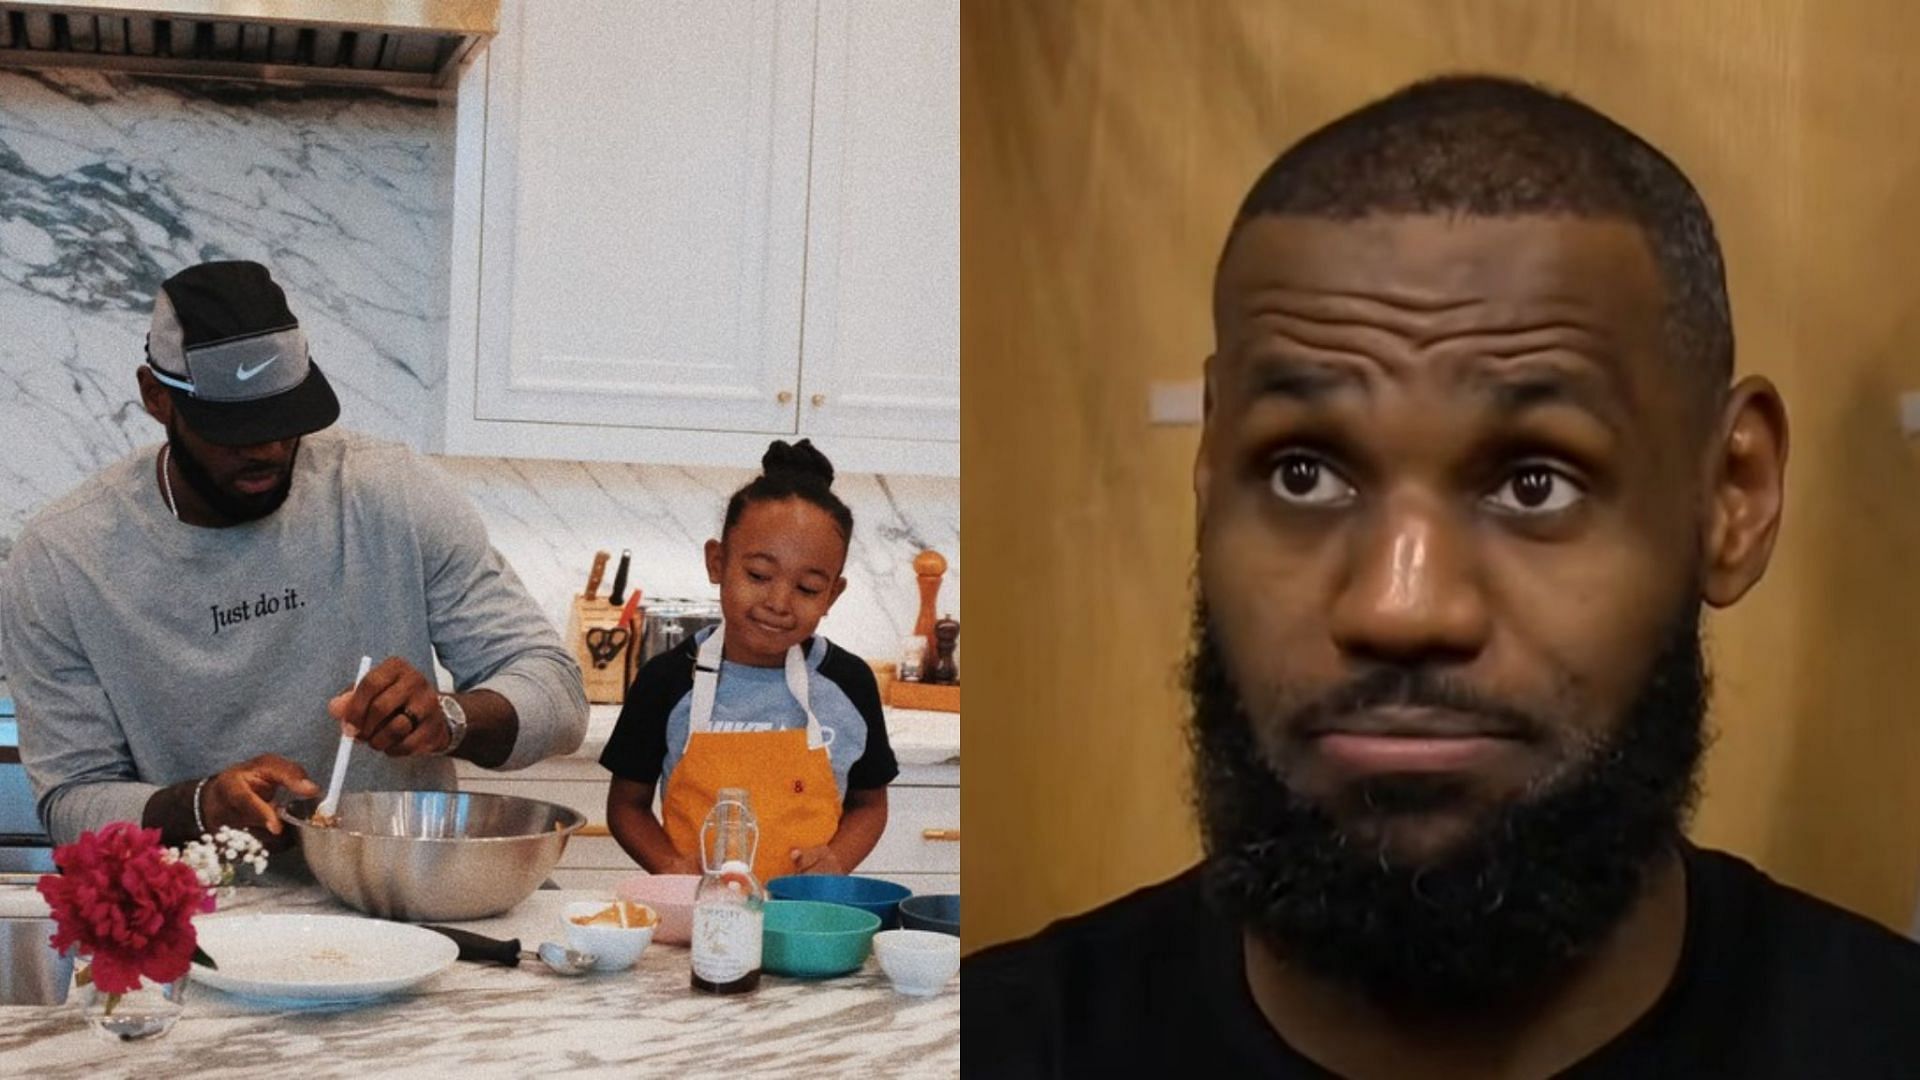 LeBron James plays down facing Celtics on Christmas, prefers seeing daughter Zhuri open gifts